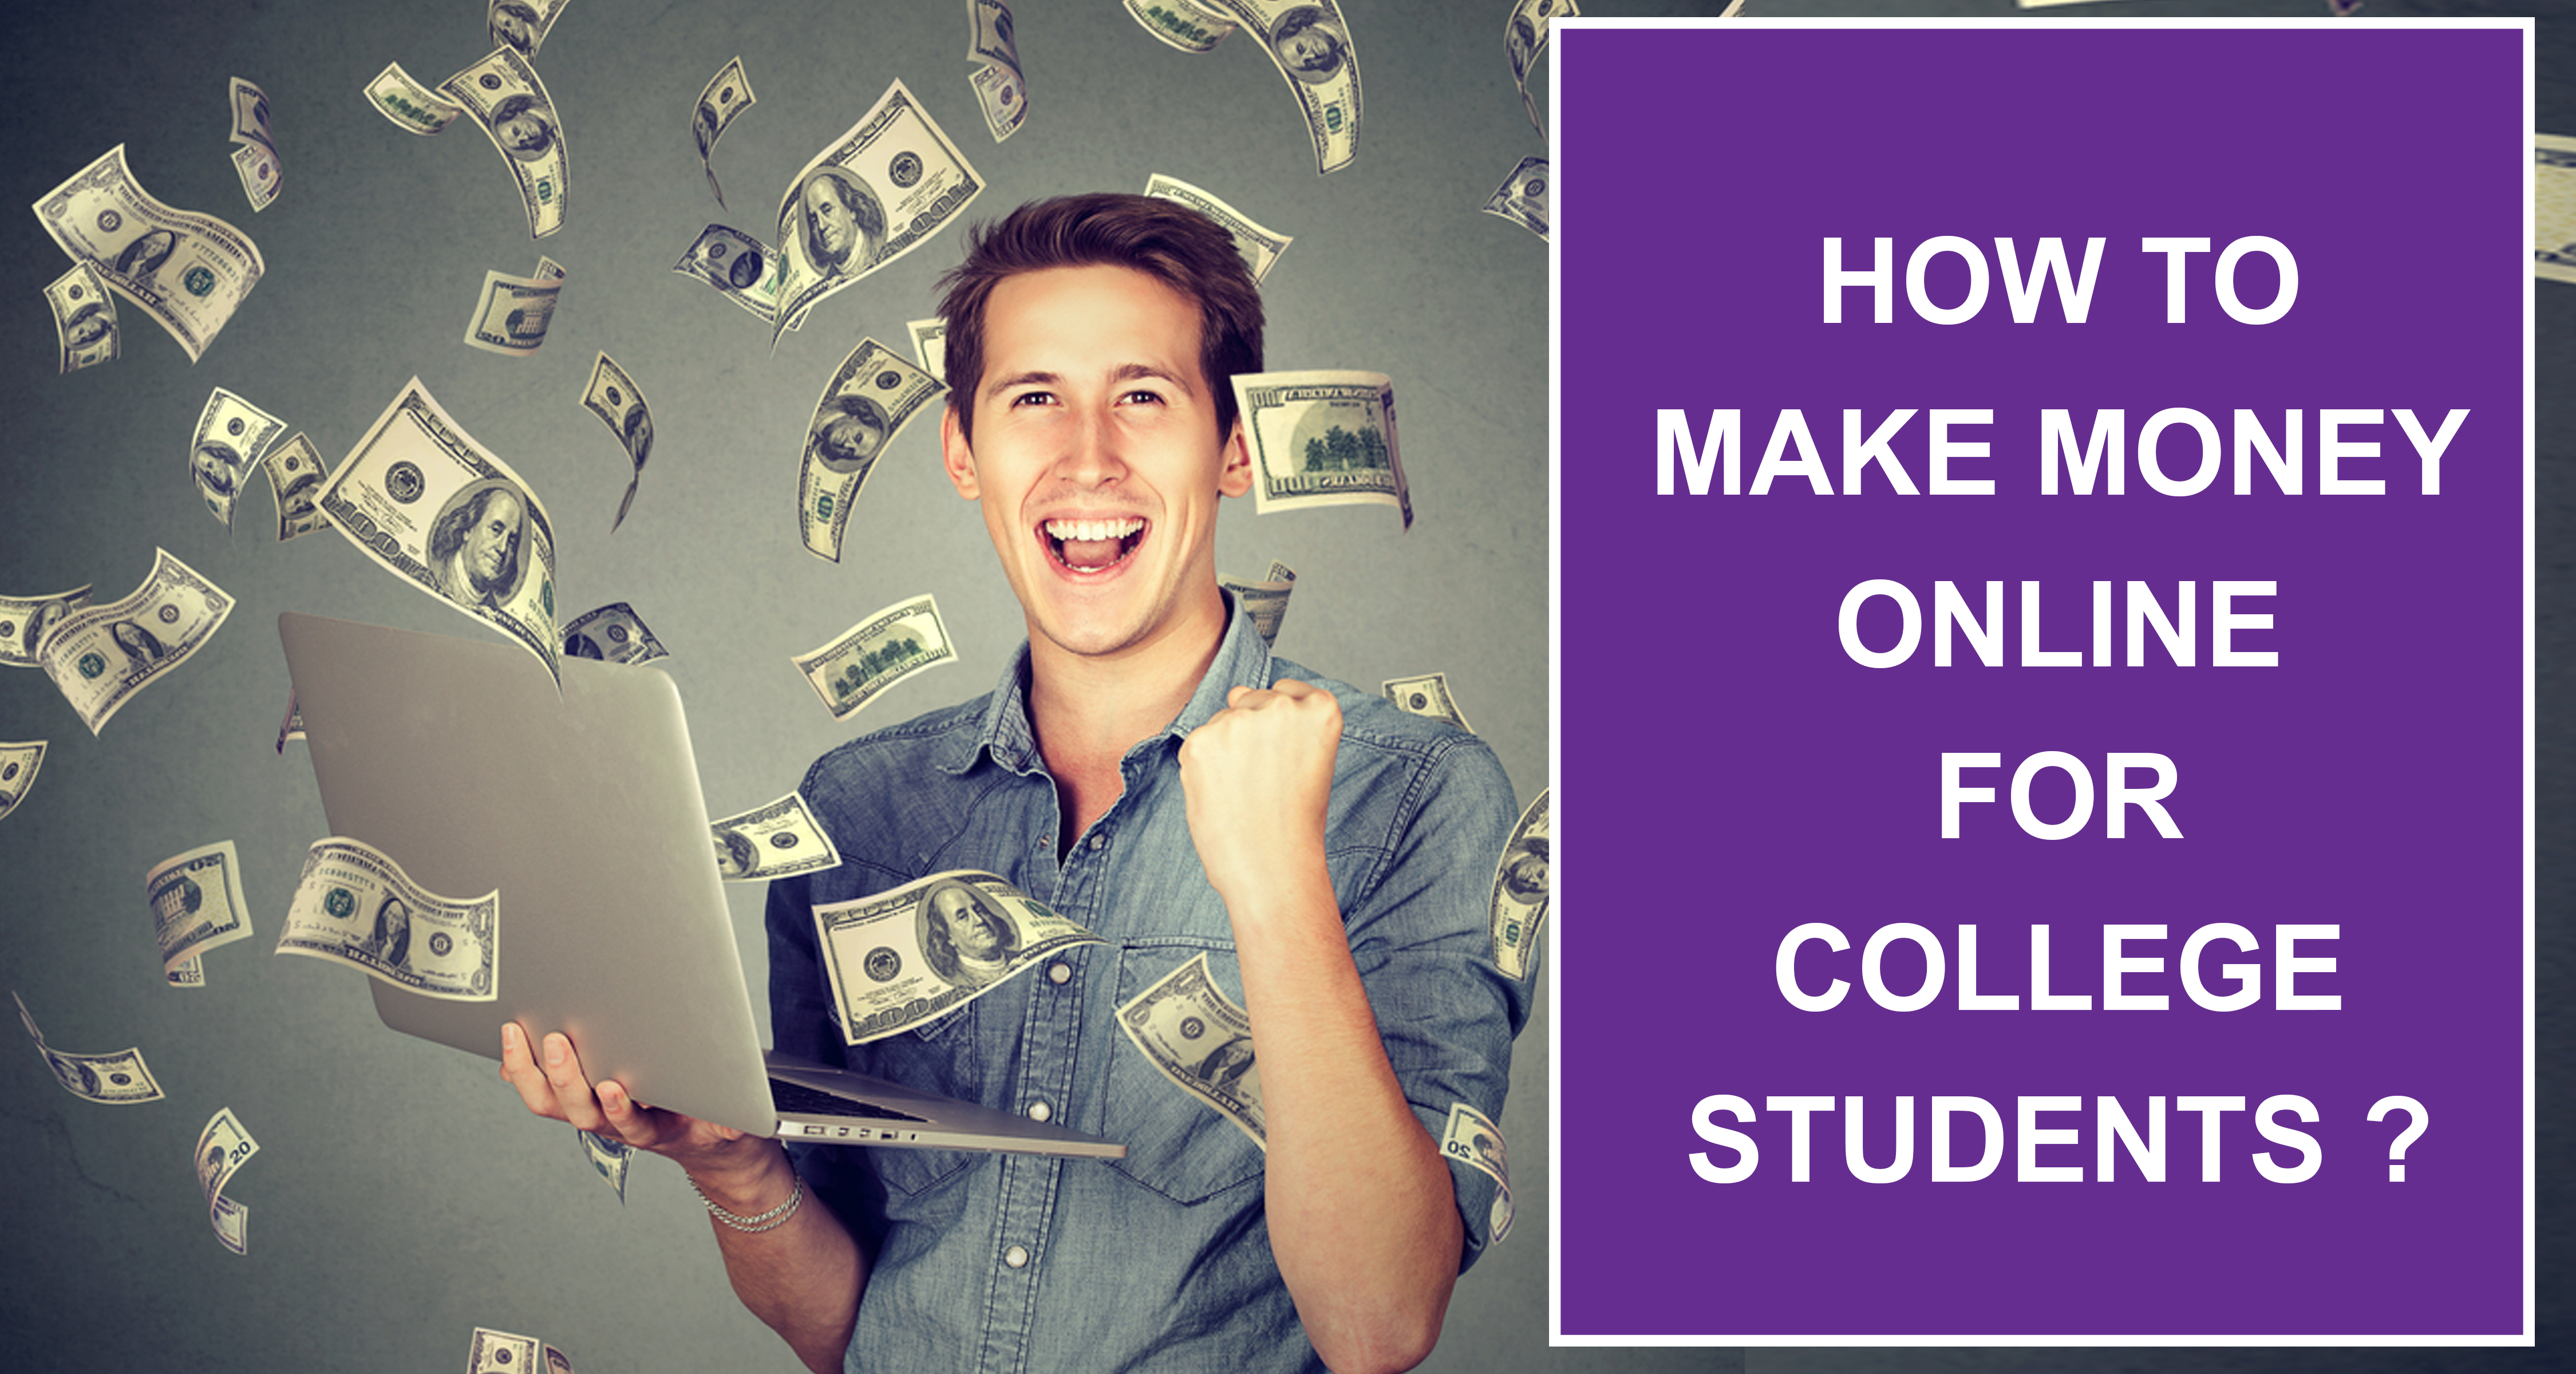 How to Make Money Online For College Students